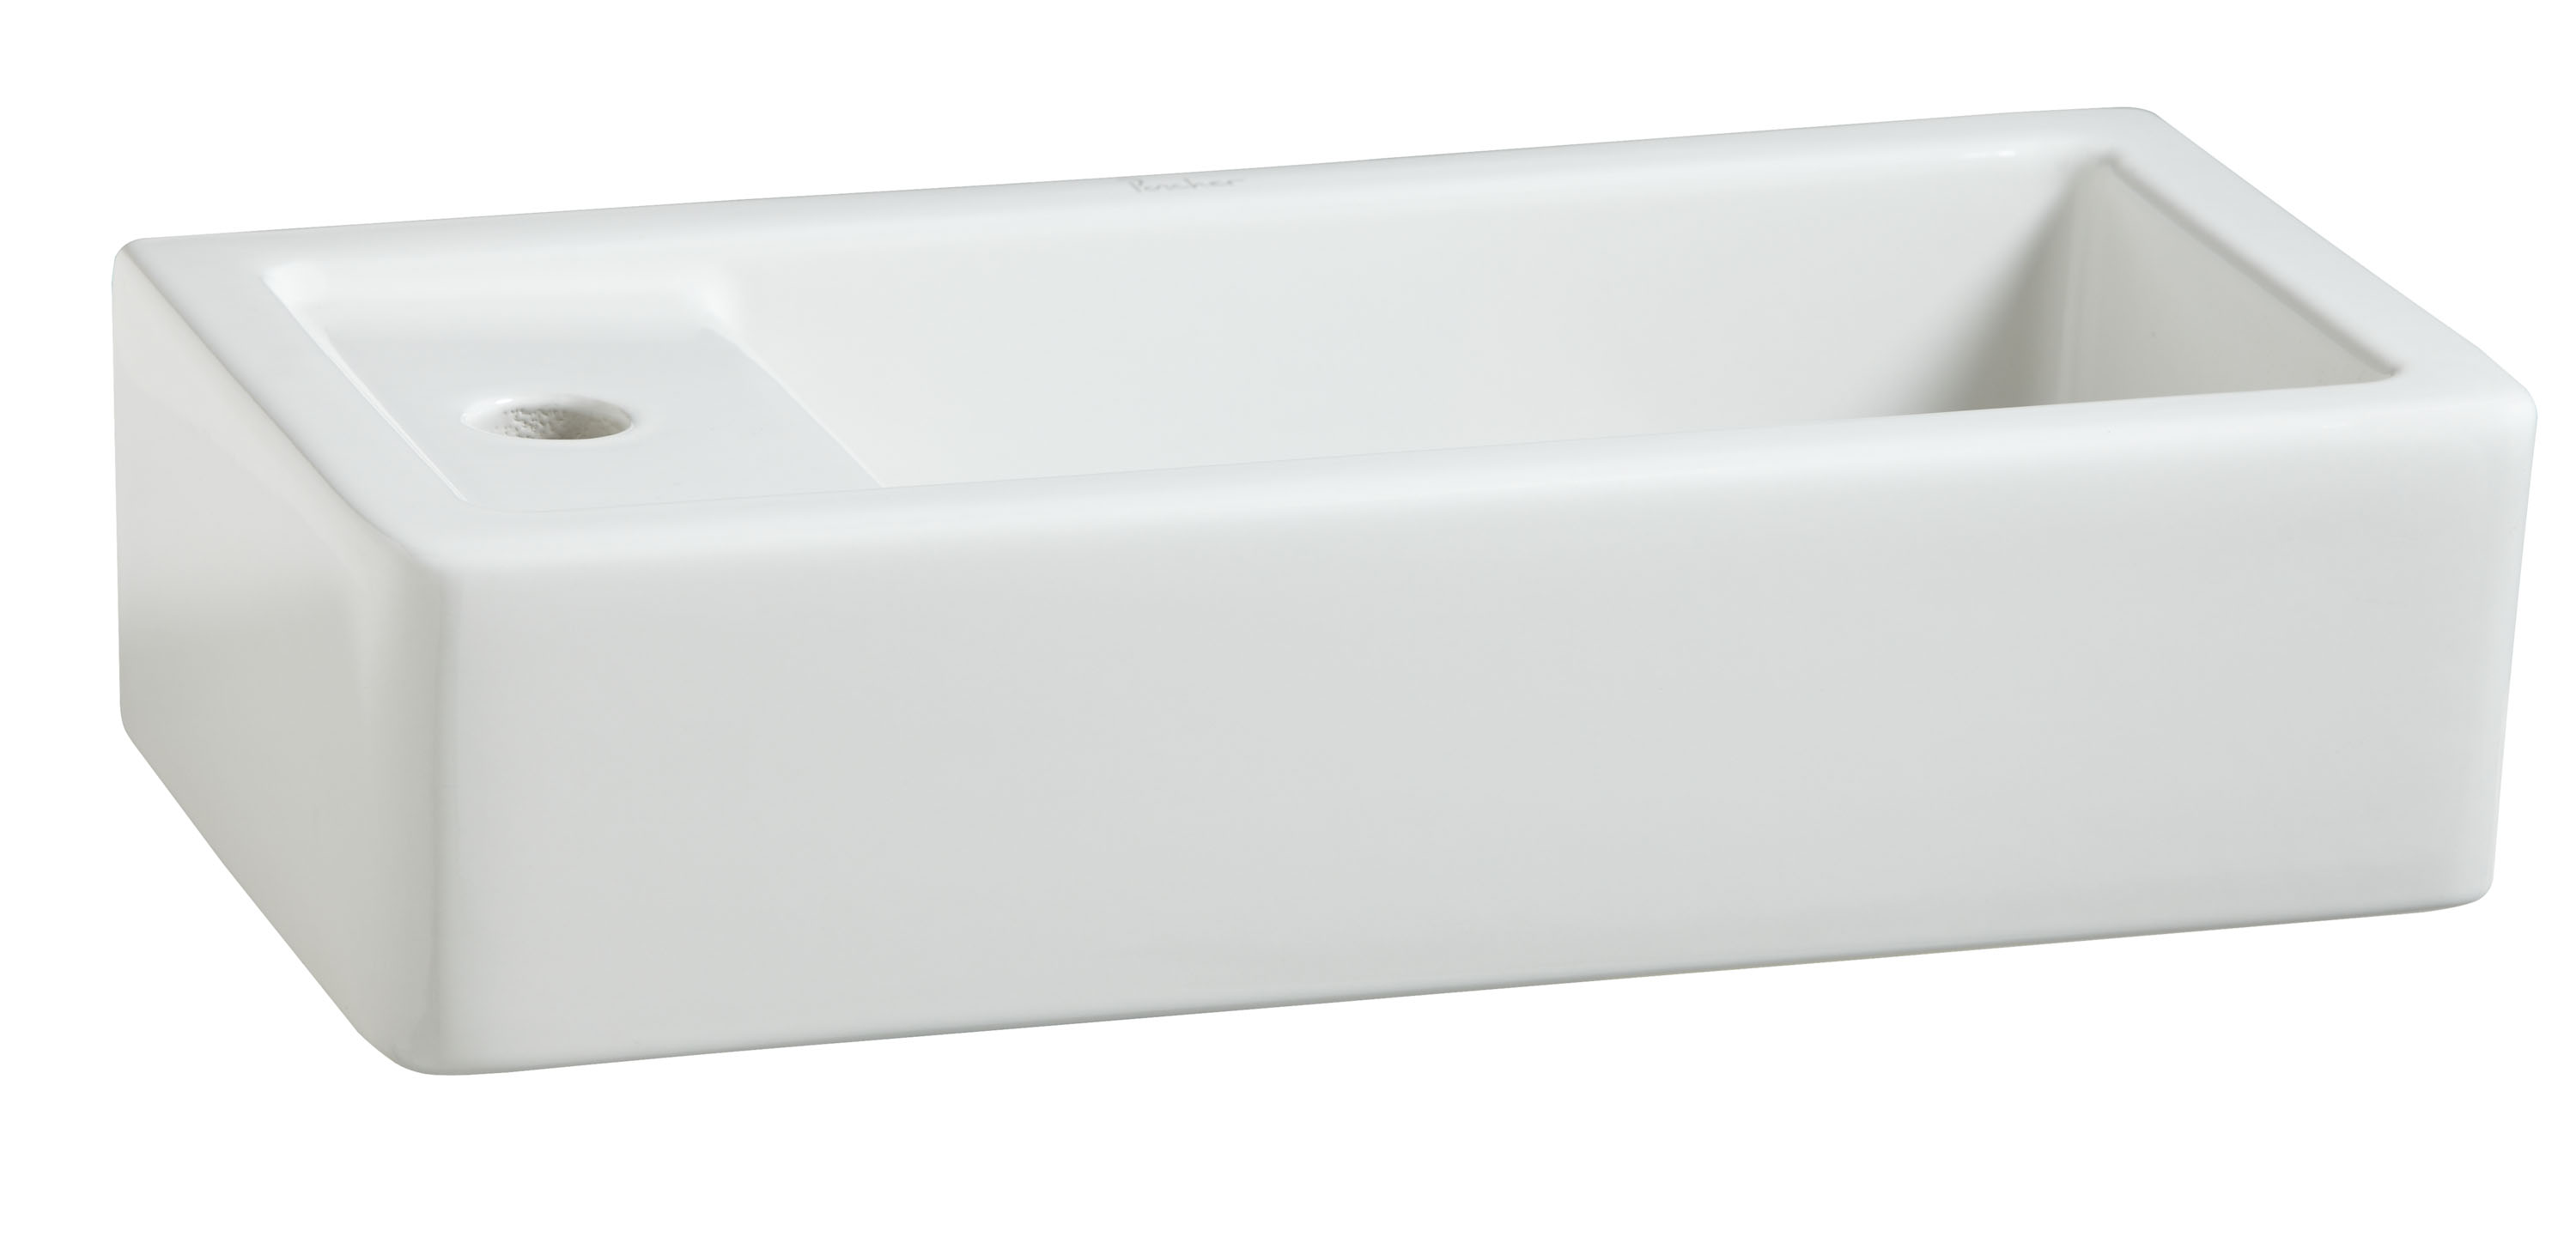 Cossu® Wall-Hung Sink, 1-Hole with Left-Hand Drain